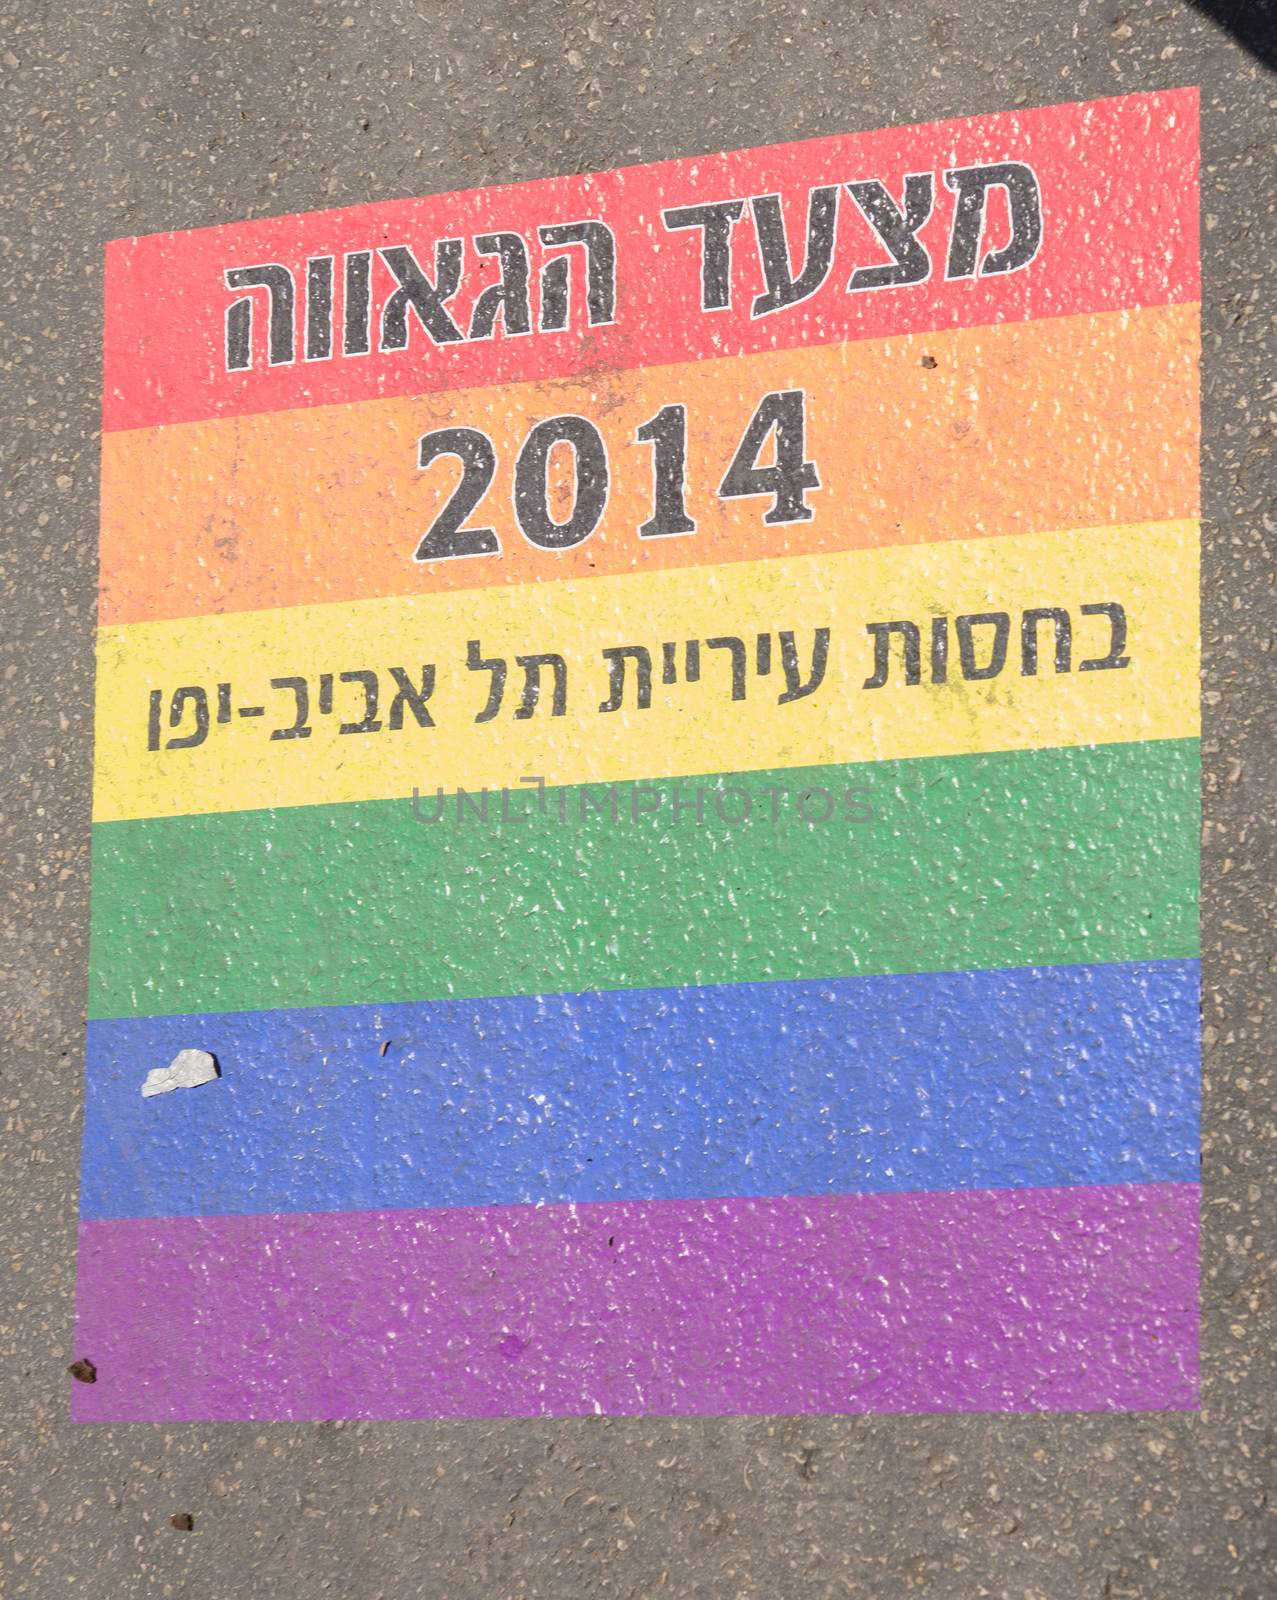 TEL-AVIV - JUNE 13, 2014: A printed sign on the street floor - Pride Parade 2014 Sponsored by the city of Tel Aviv. The pride Parade is an annual event of the gay community